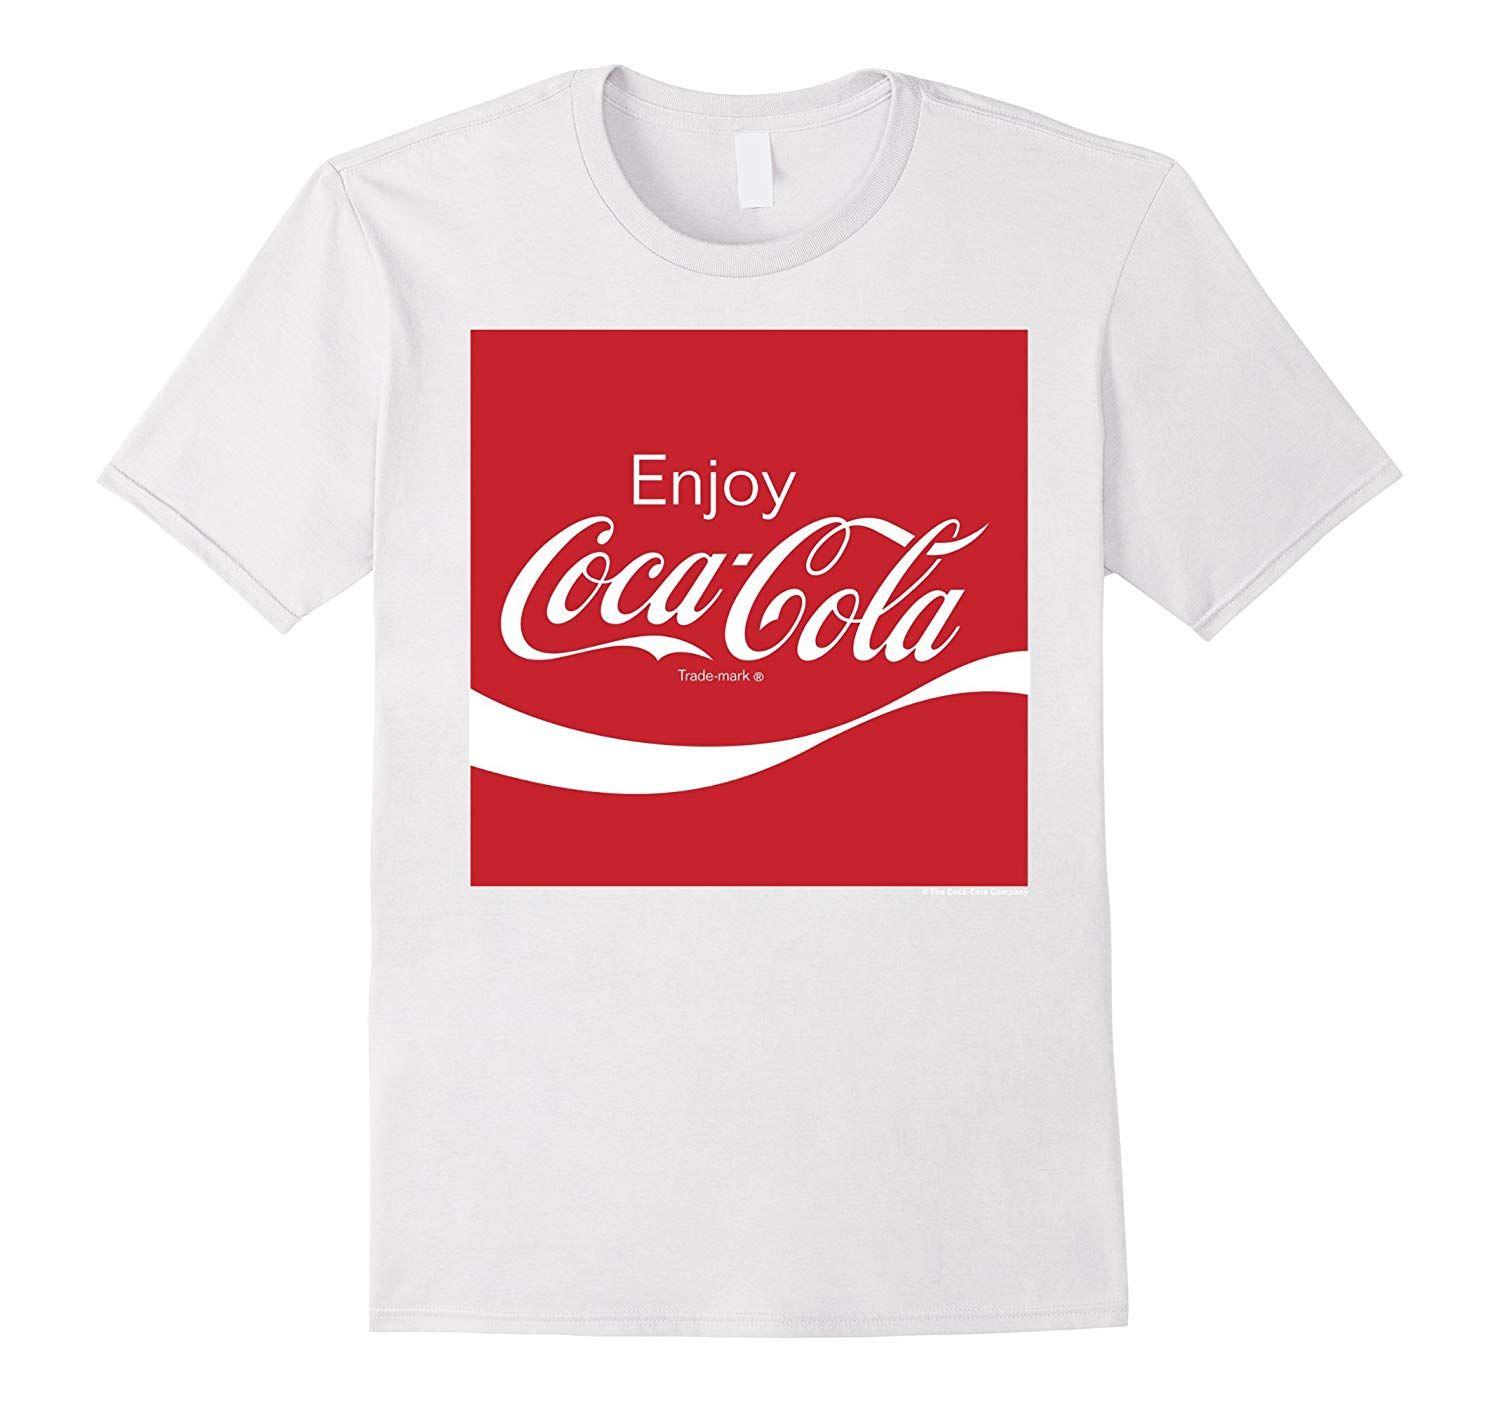 White and Red Square Logo - Coca-Cola Red Square Enjoy Logo Graphic T-Shirt-ANZ - Anztshirt